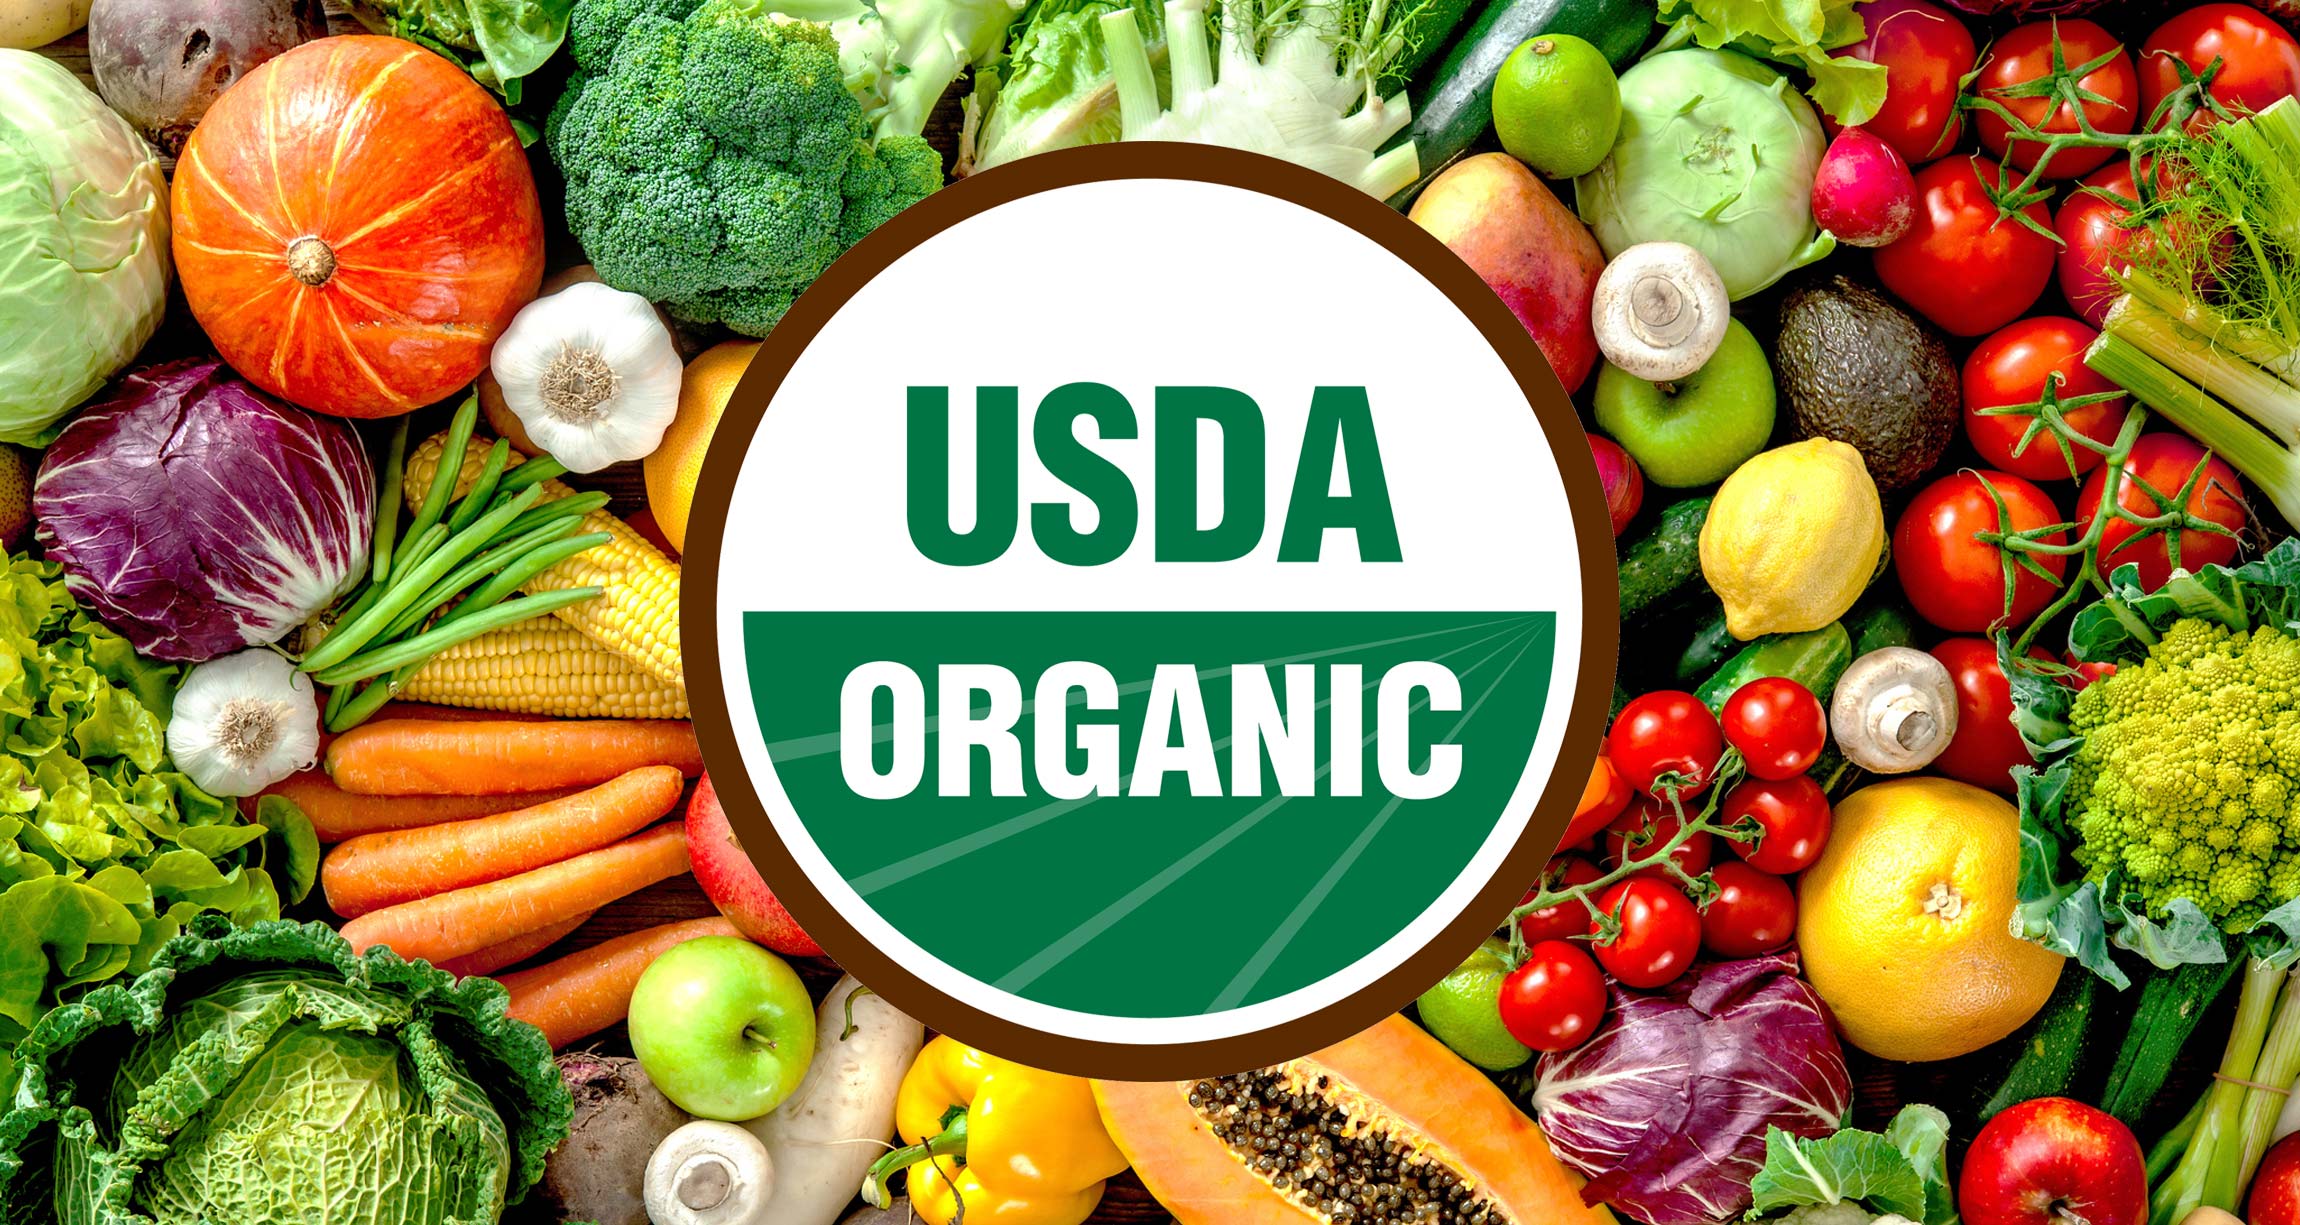  A variety of fruits and vegetables with a USDA organic label in the center.